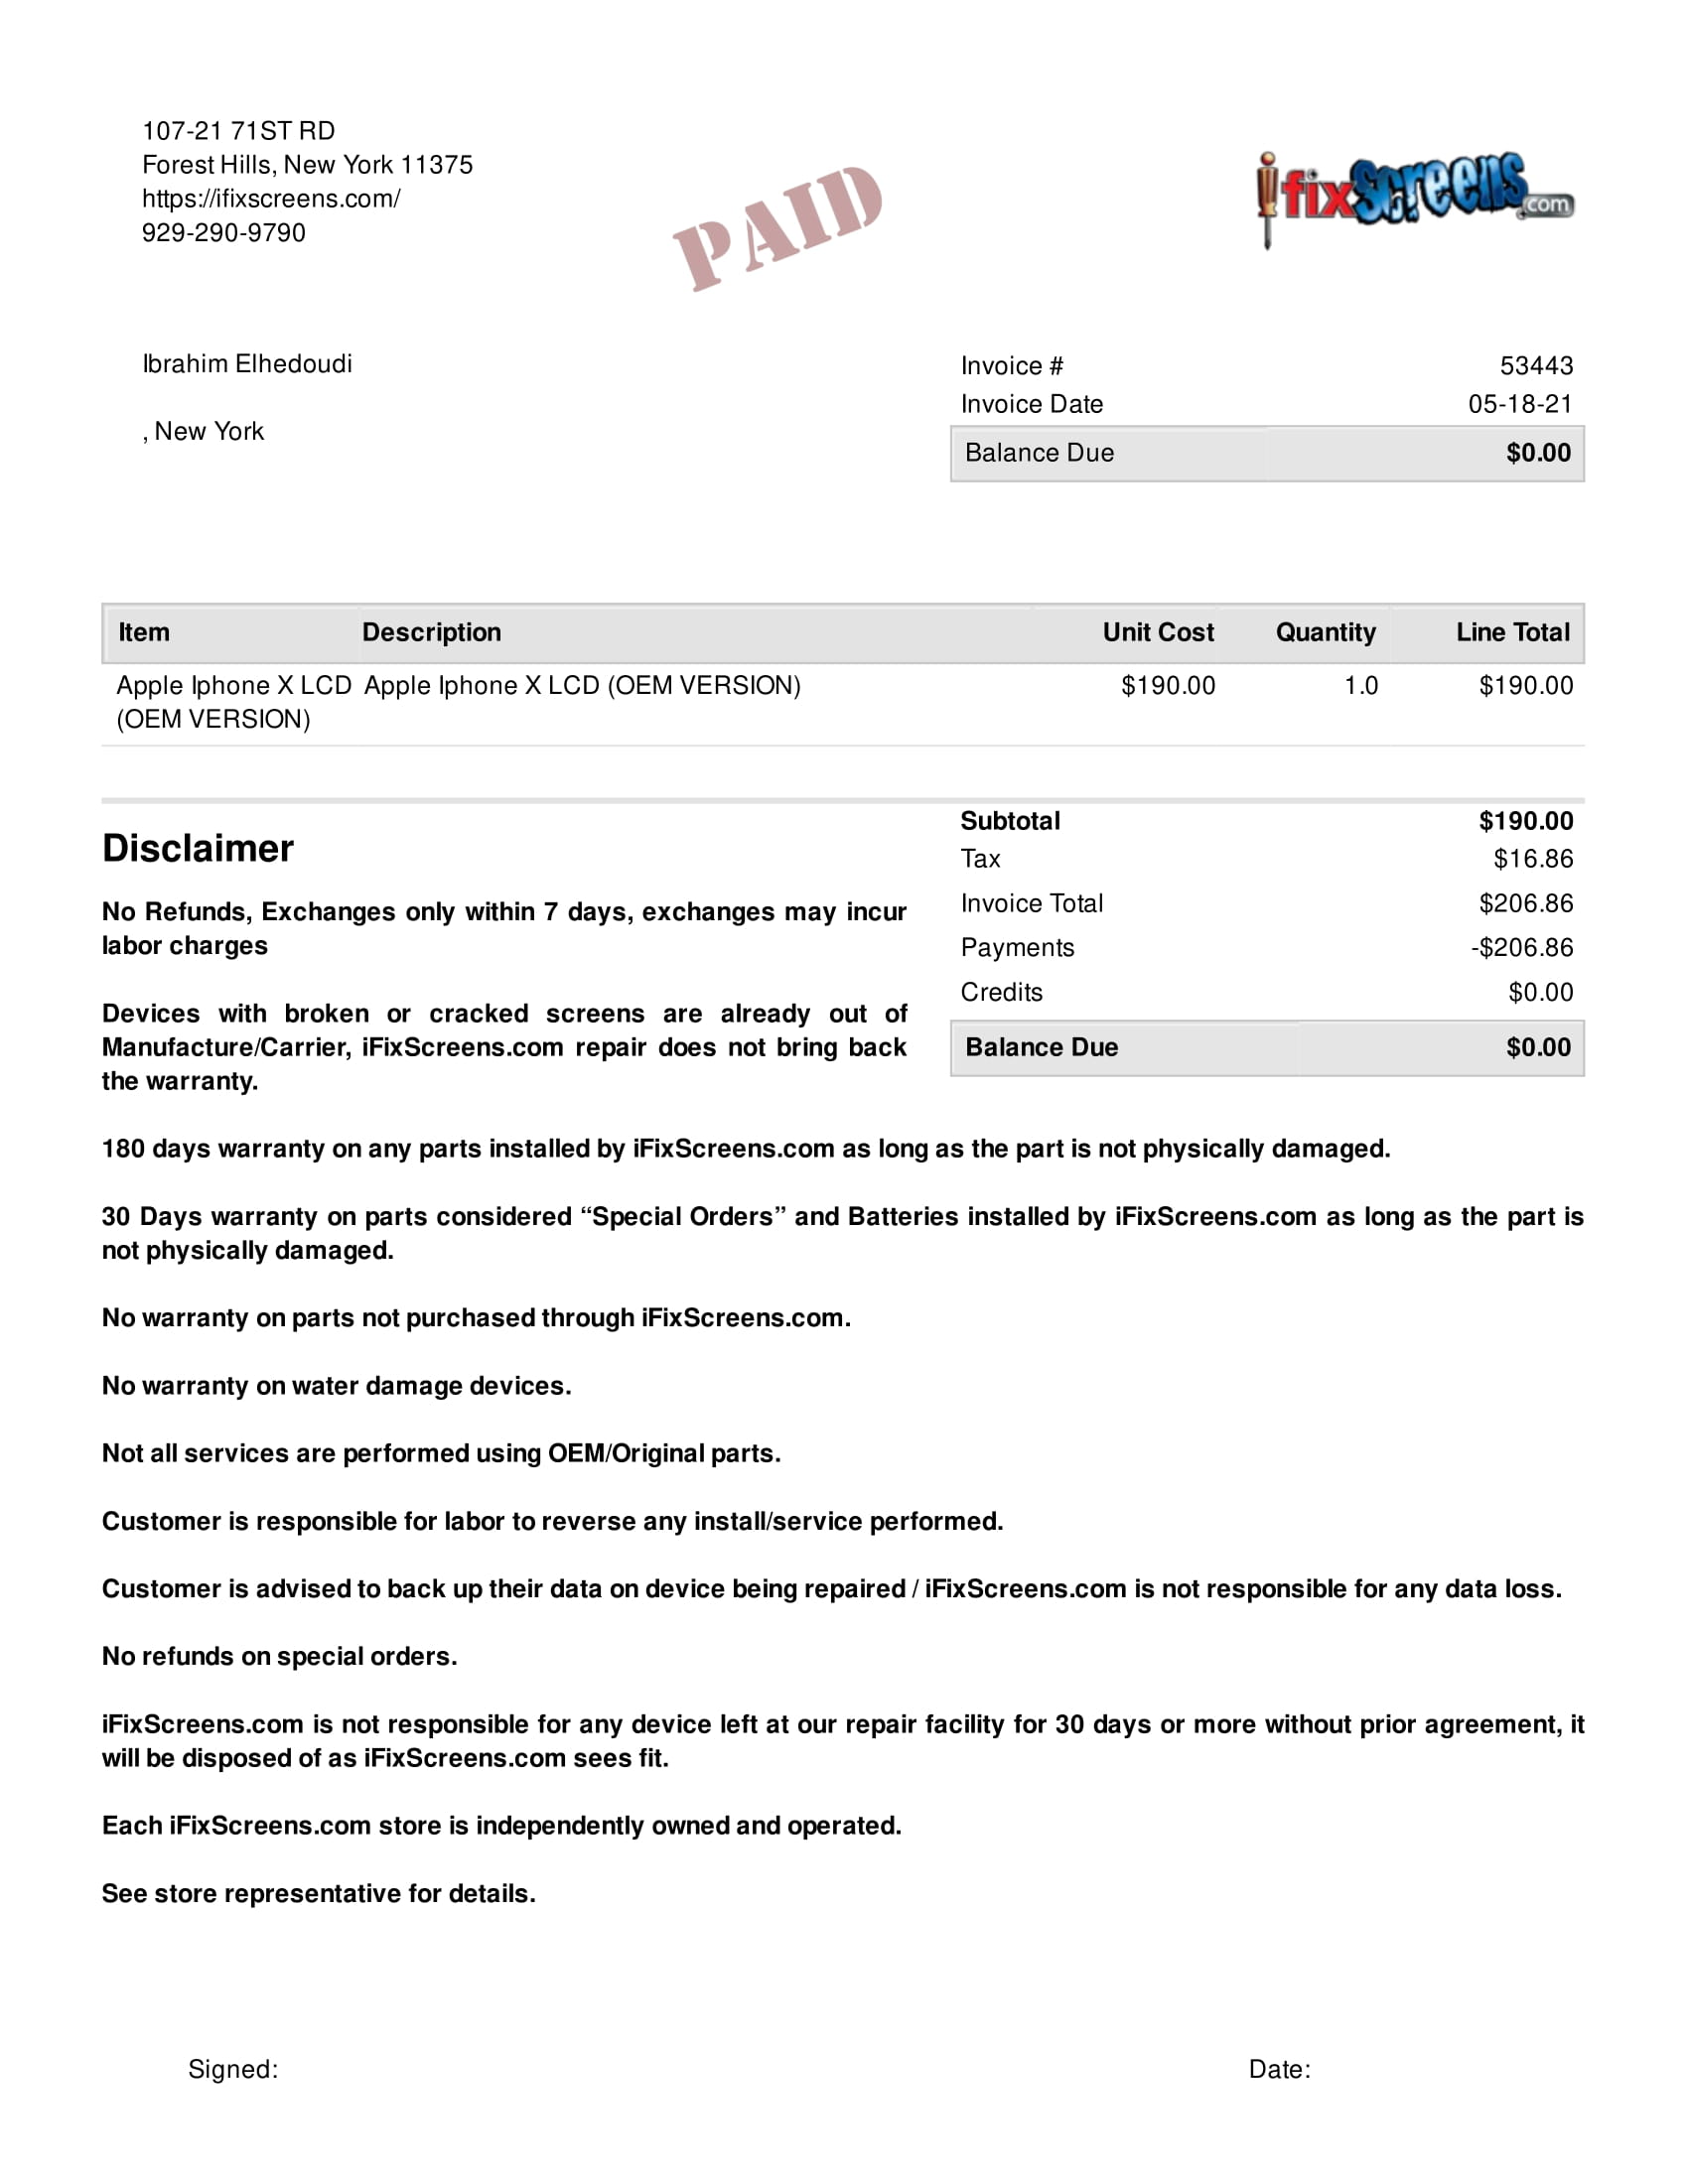 My  Invoice with the 180 days warranty  [1 of 2]